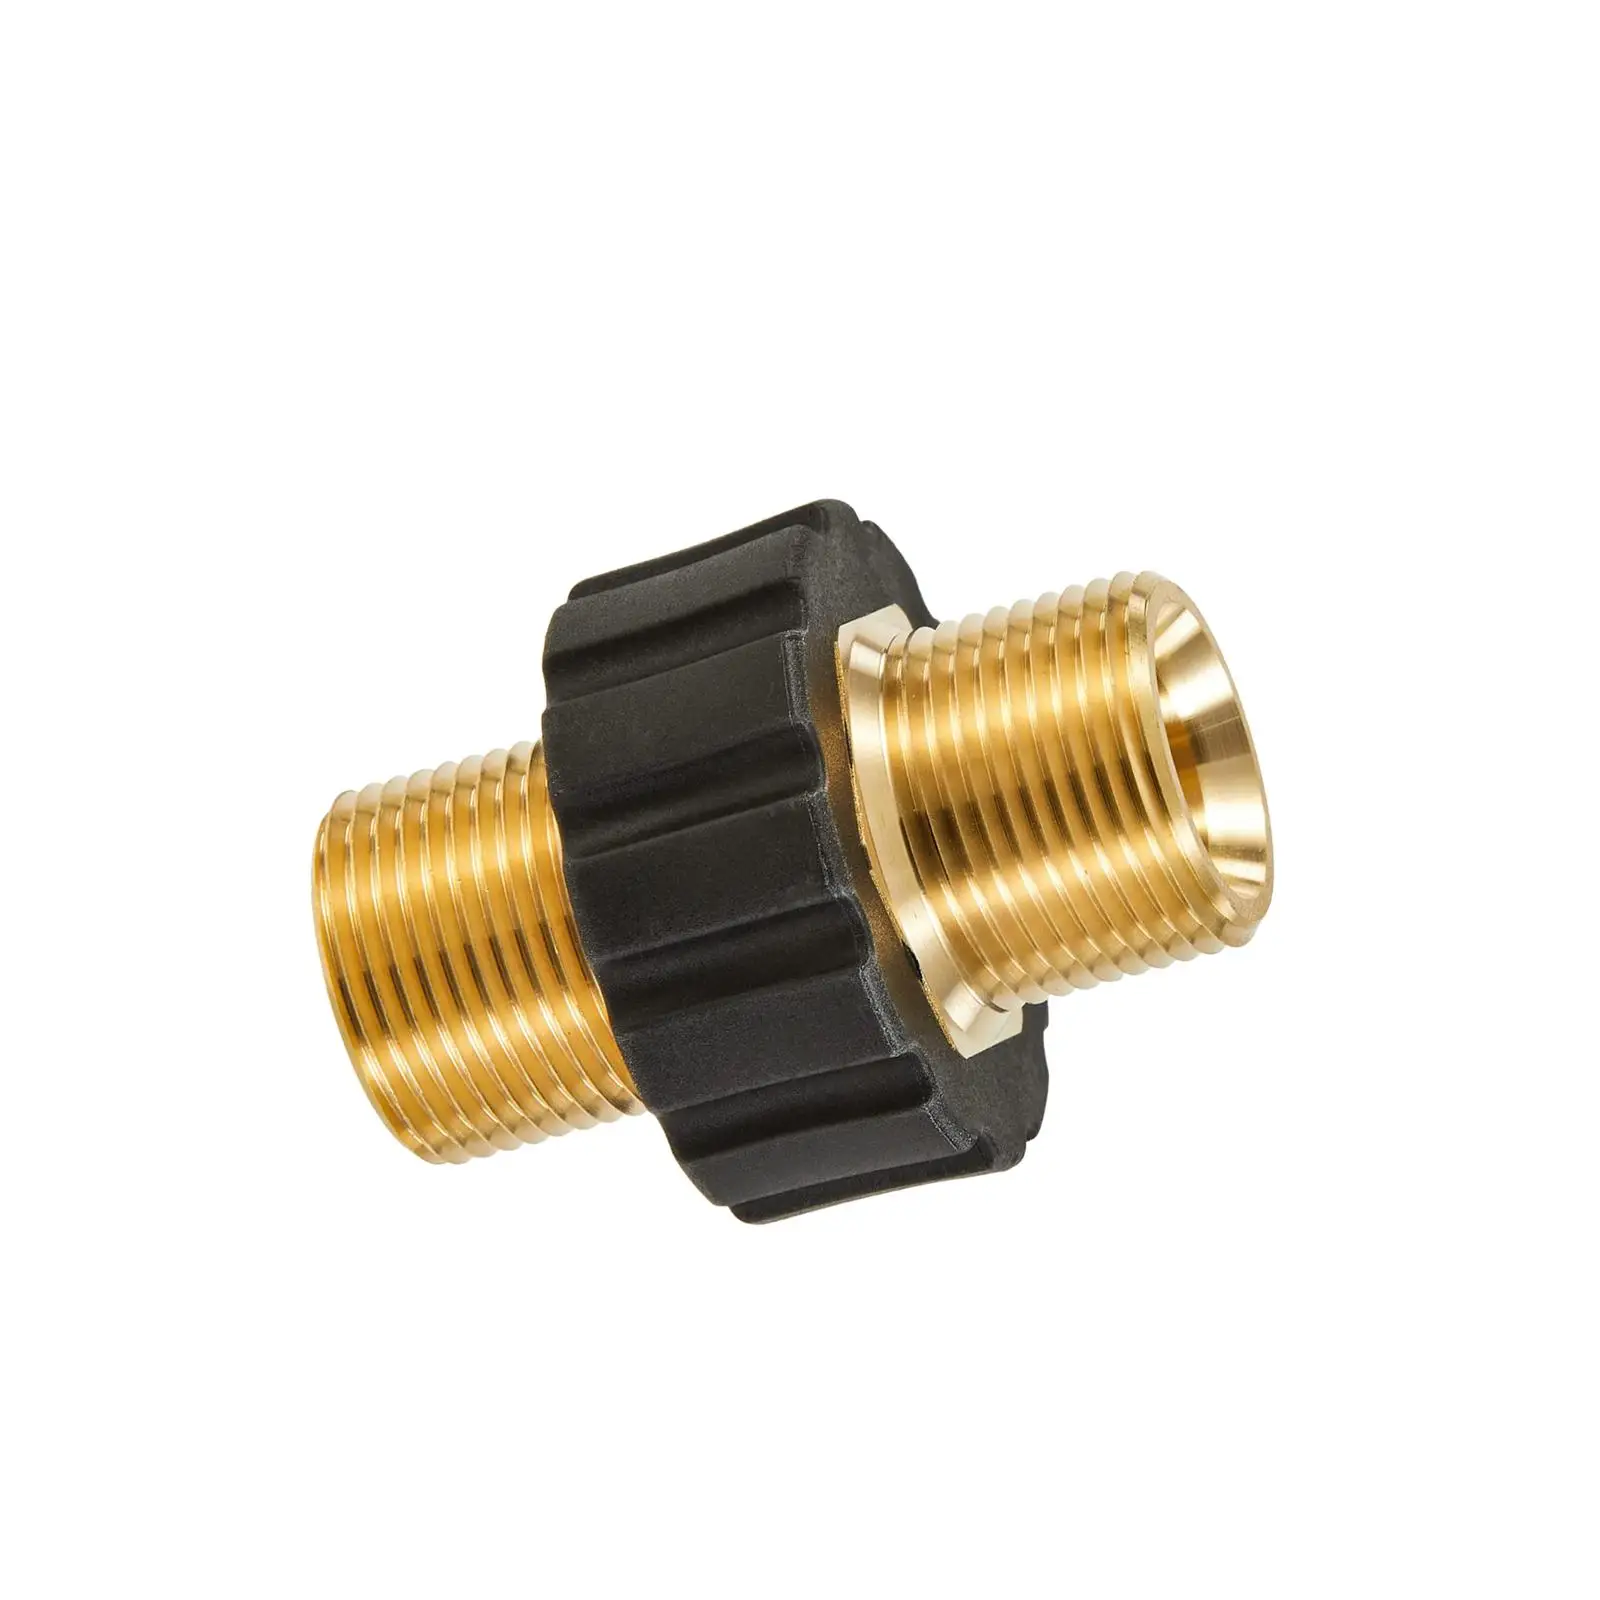 M22 14mm Male High Pressure Washer Adapter, Accessories Garden Hose Fitting 5000